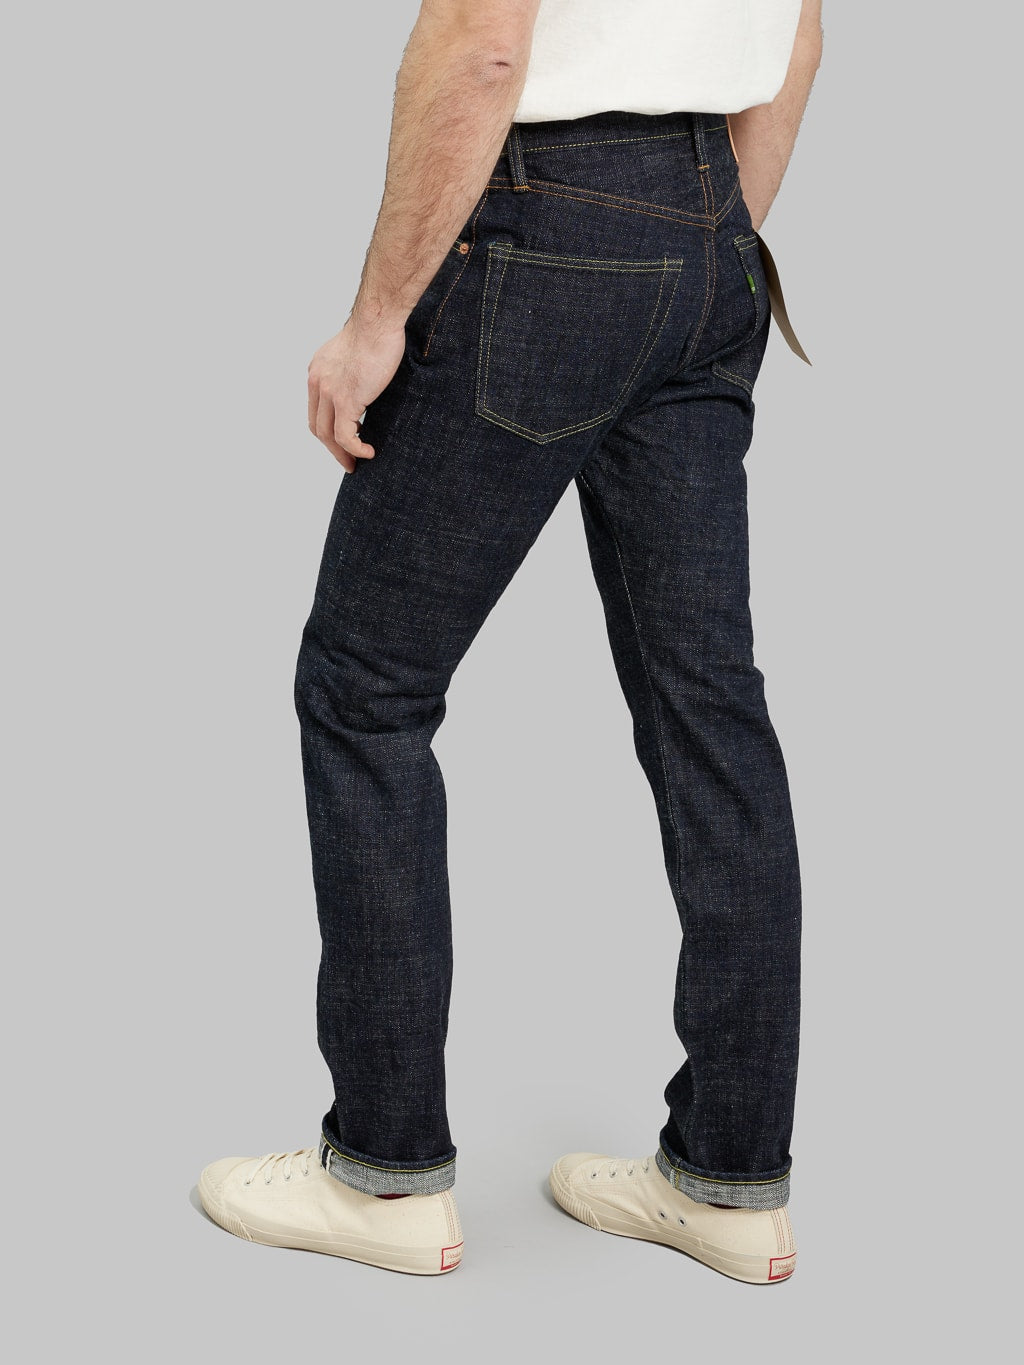 Fob factory slim straight jean back fit